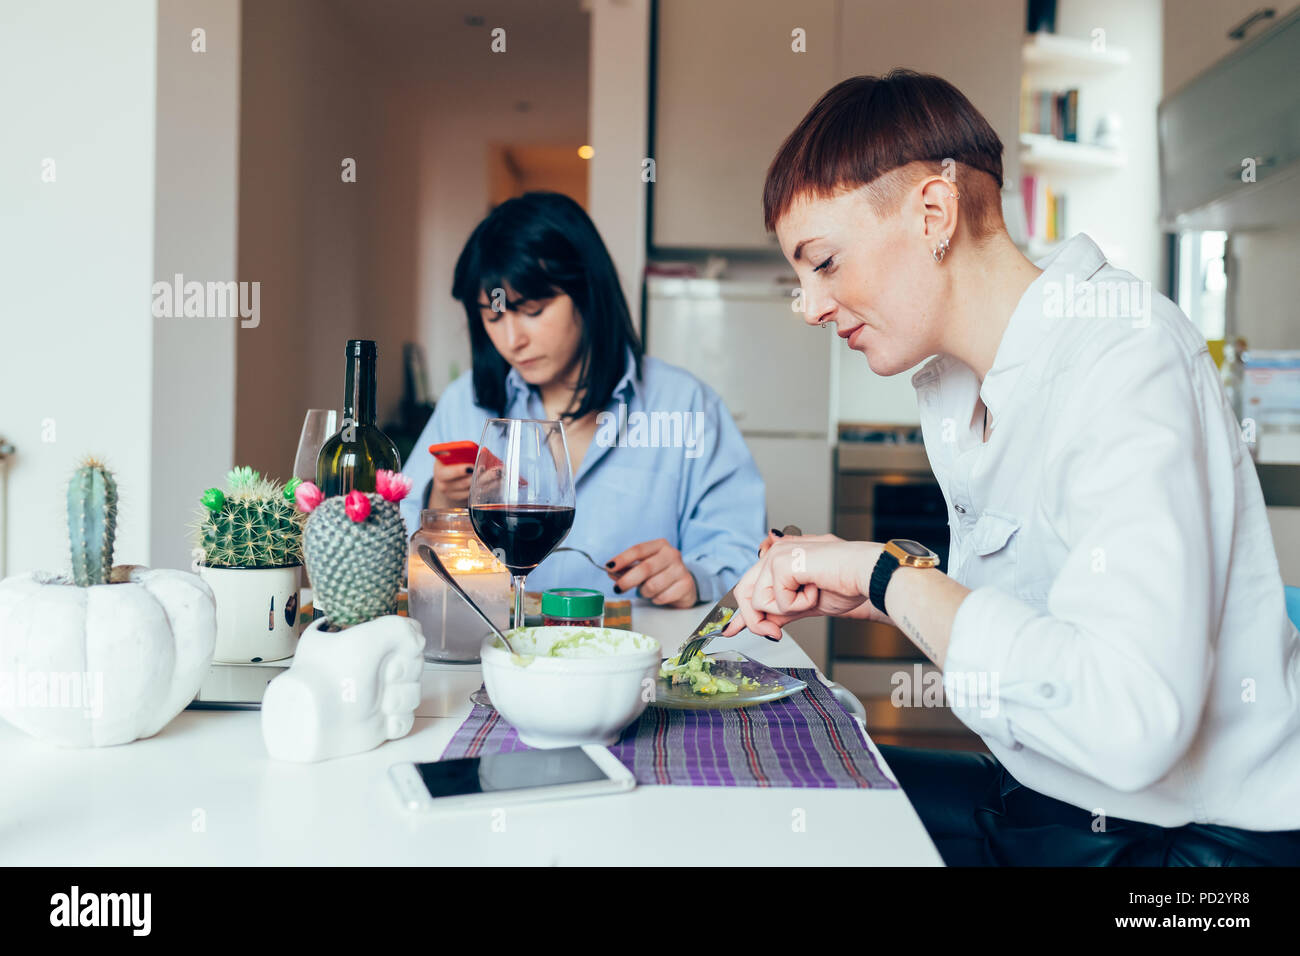 Women at home dining at table Stock Photo